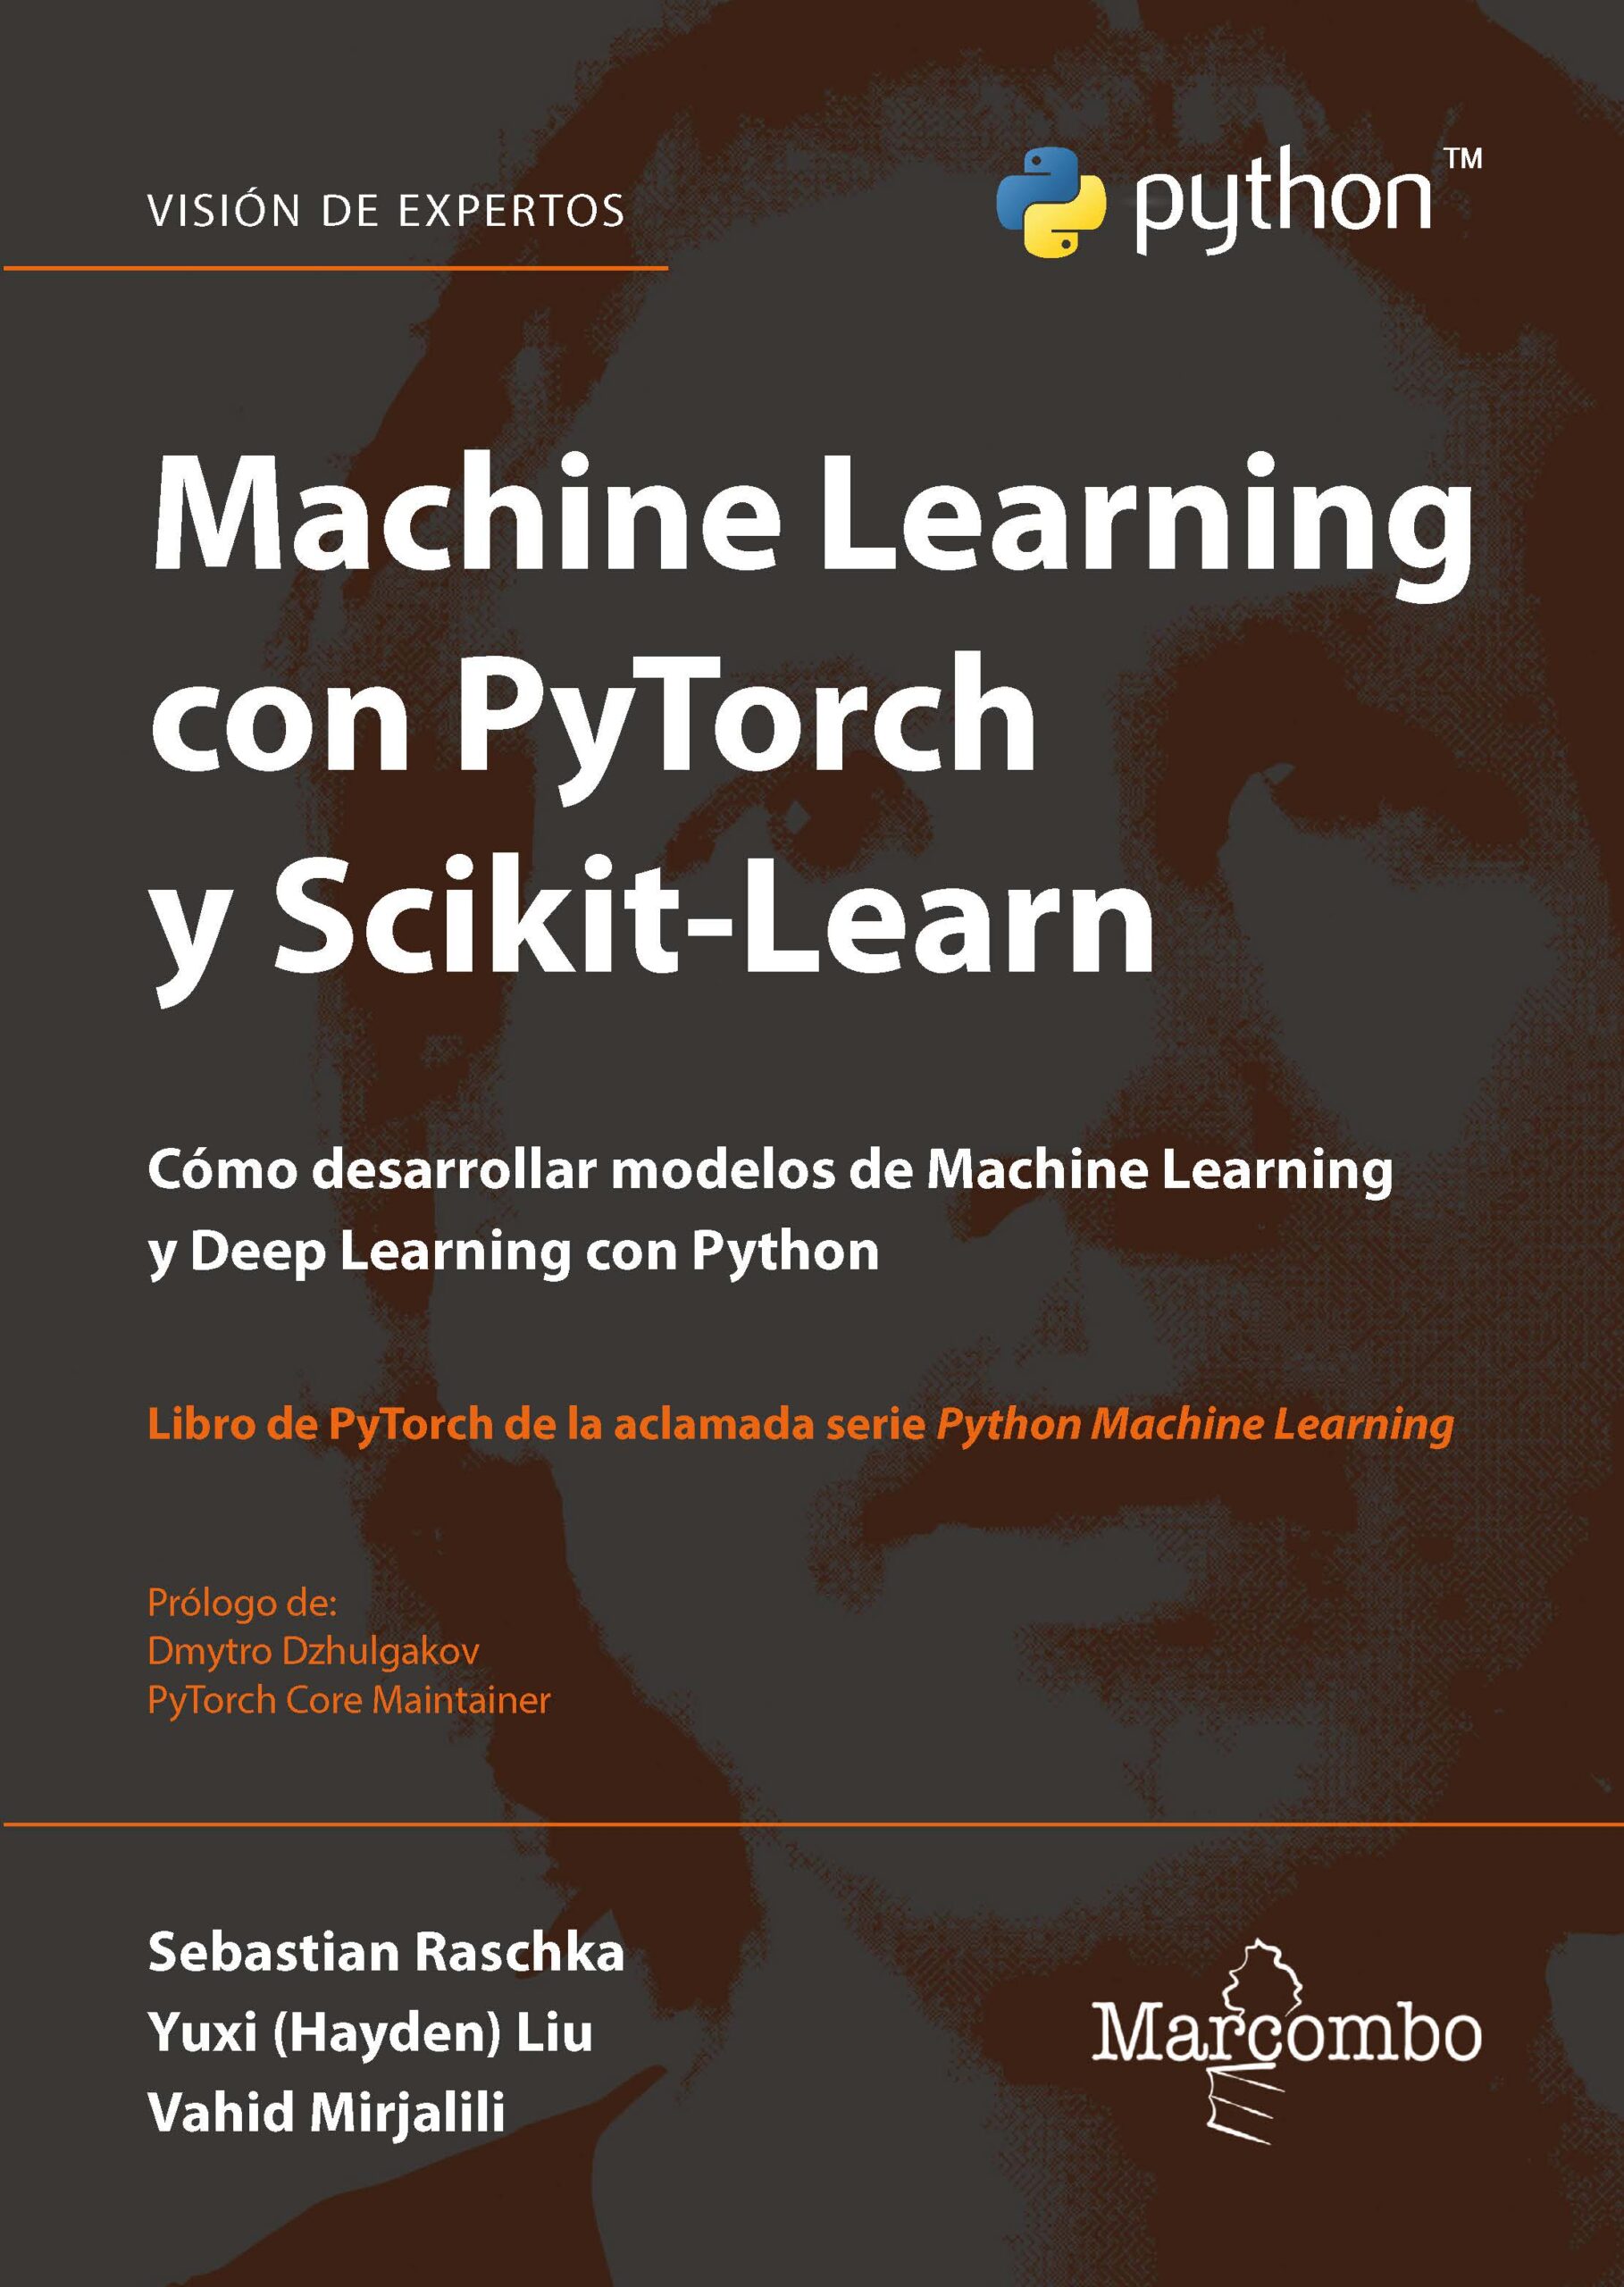 Machine Learning con PyTorch y Scikit-Learn